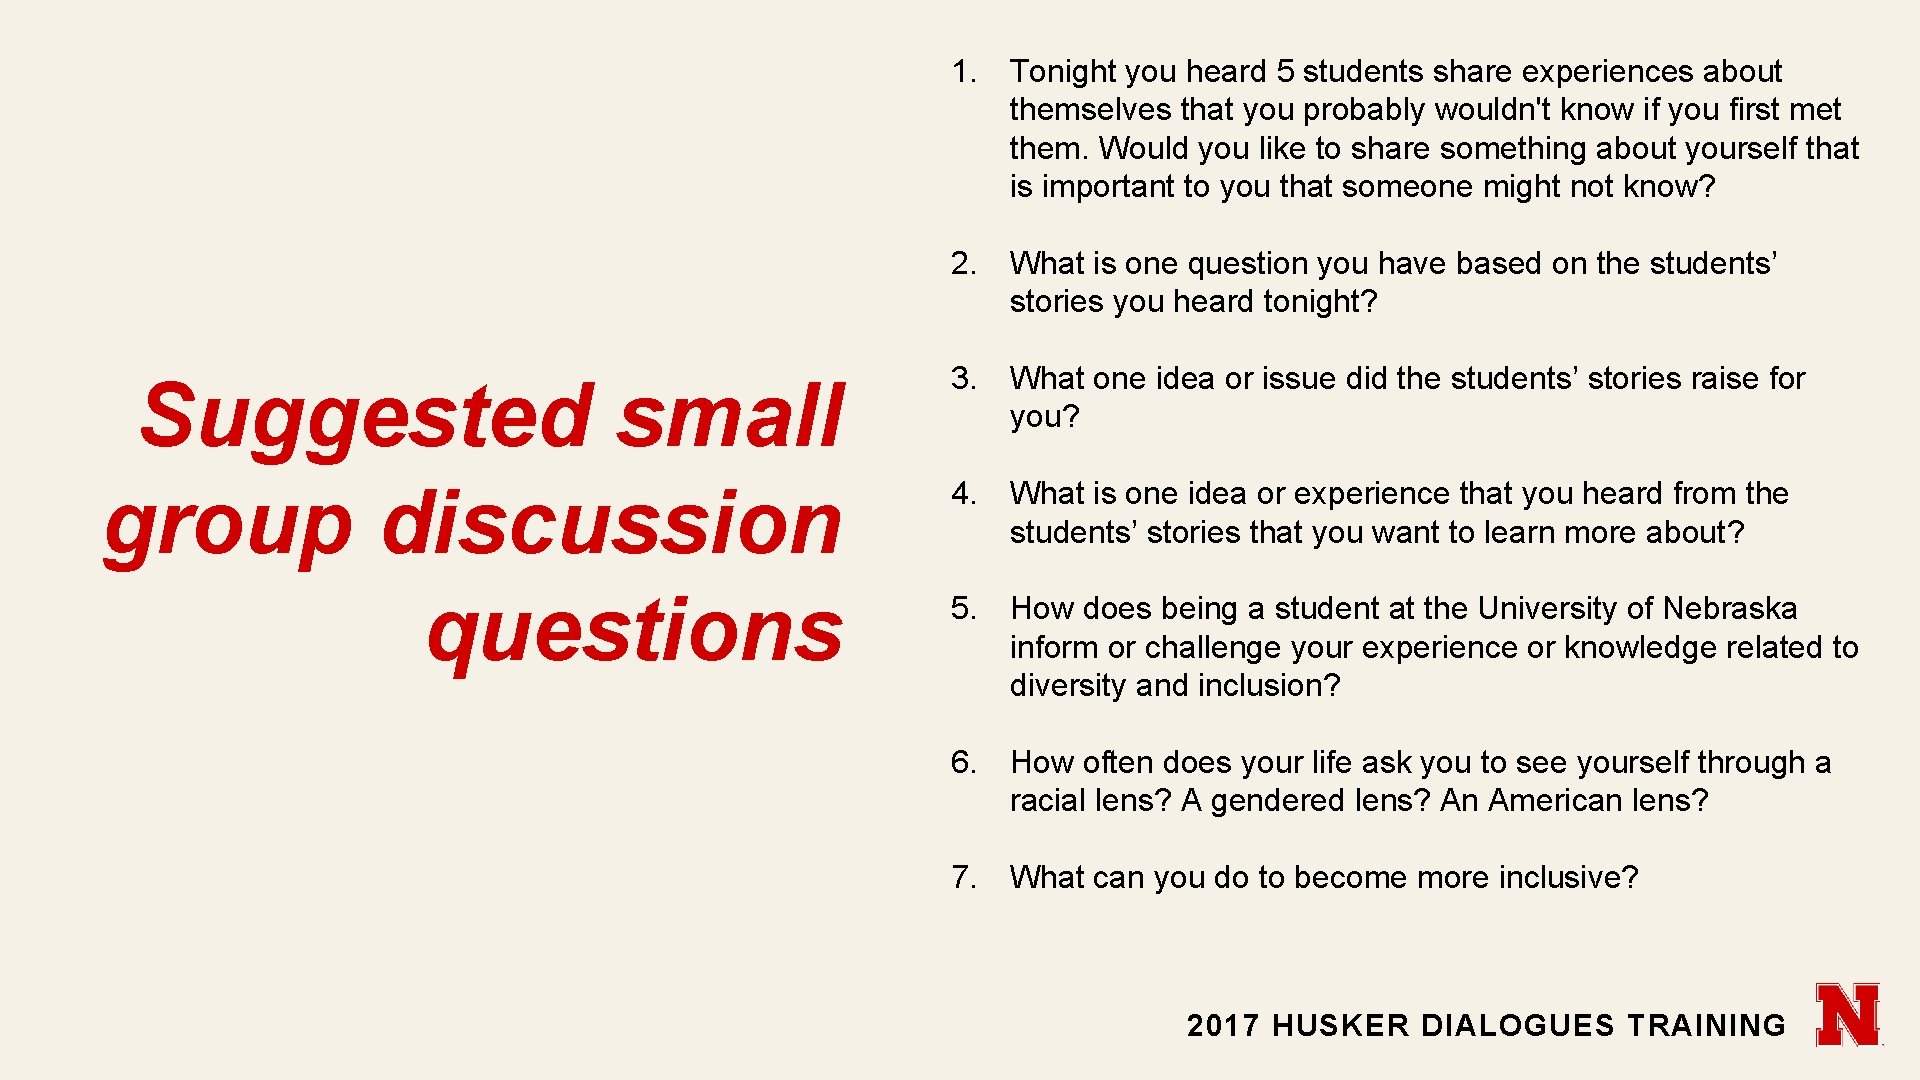 1. Tonight you heard 5 students share experiences about themselves that you probably wouldn't